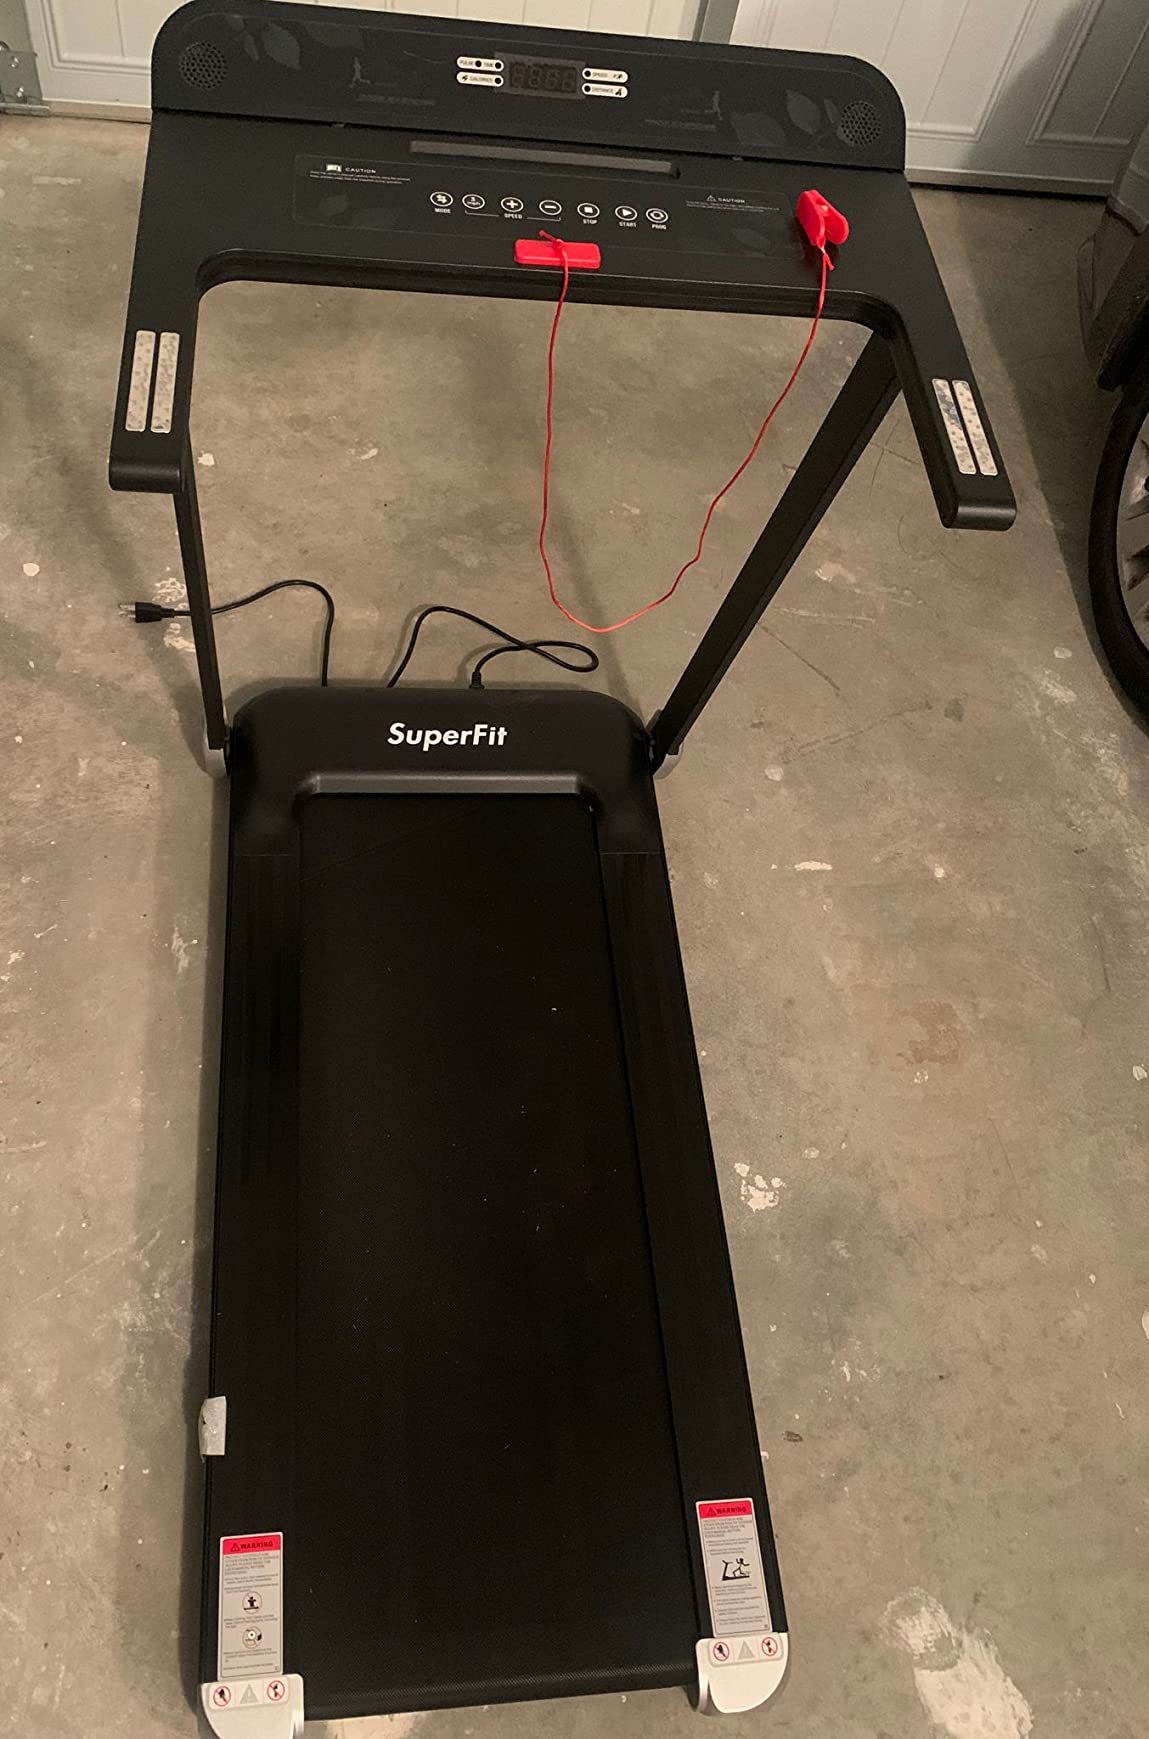 This Treadmill is a very good choice and value for my money